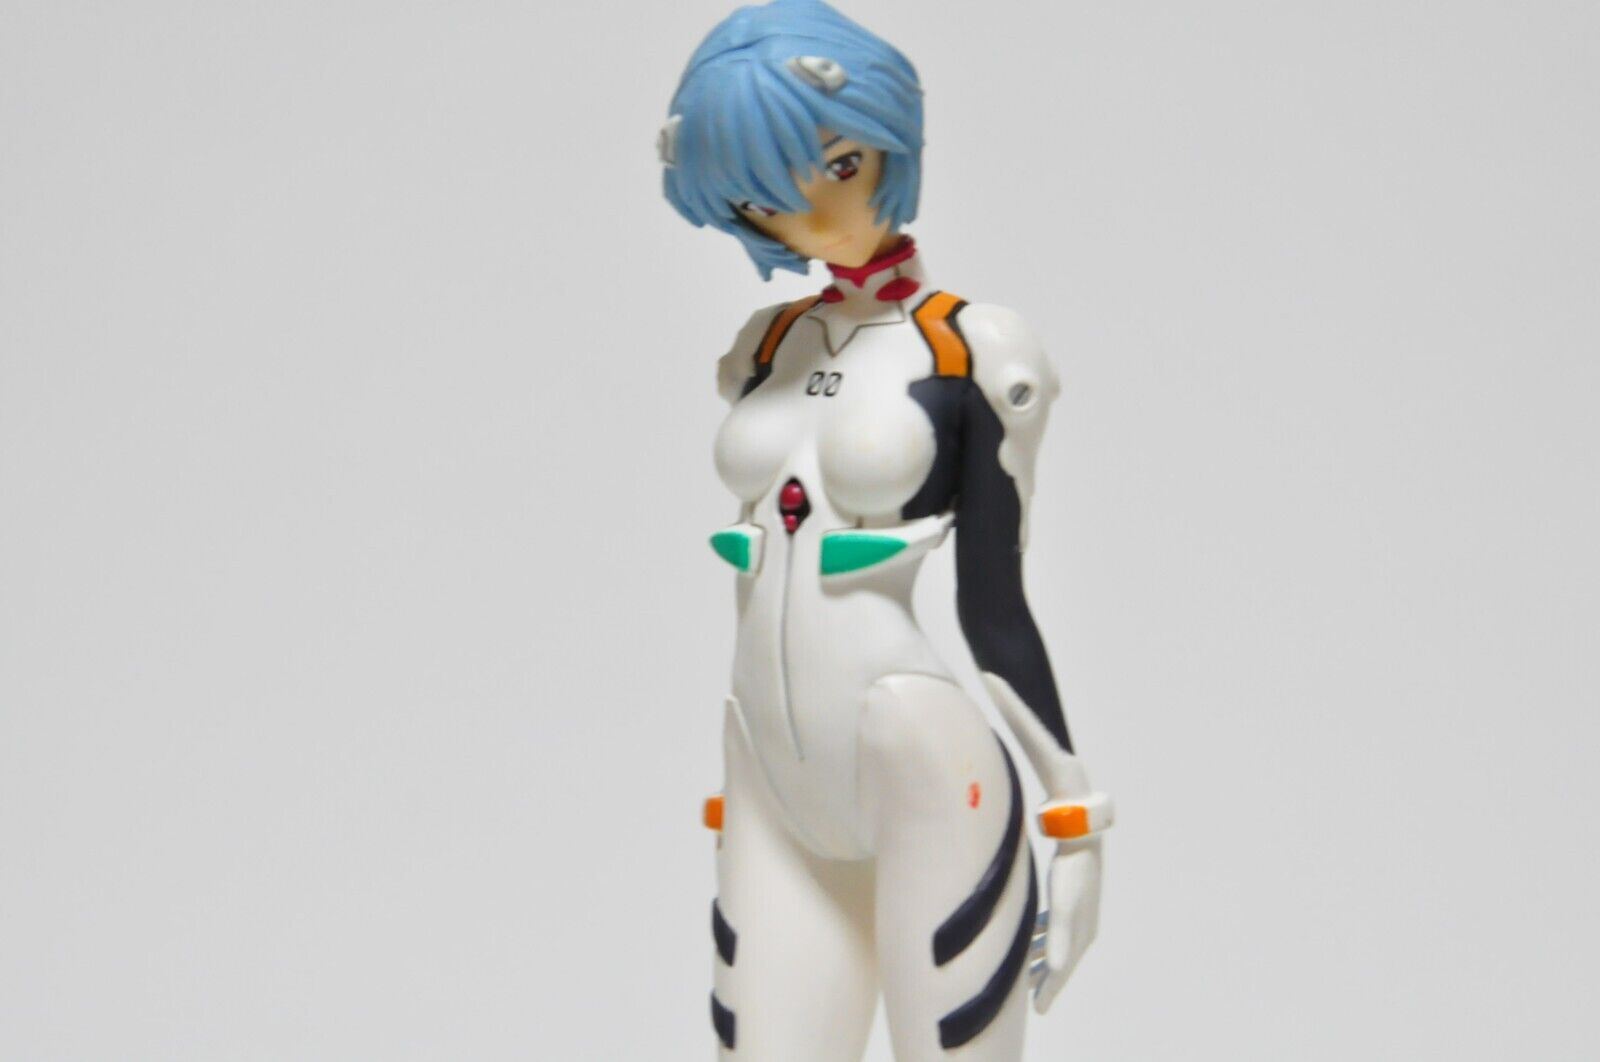 Neon Genesis Evangelion Rei Ayanami Extra Figure Anime Toy Collection 7 in